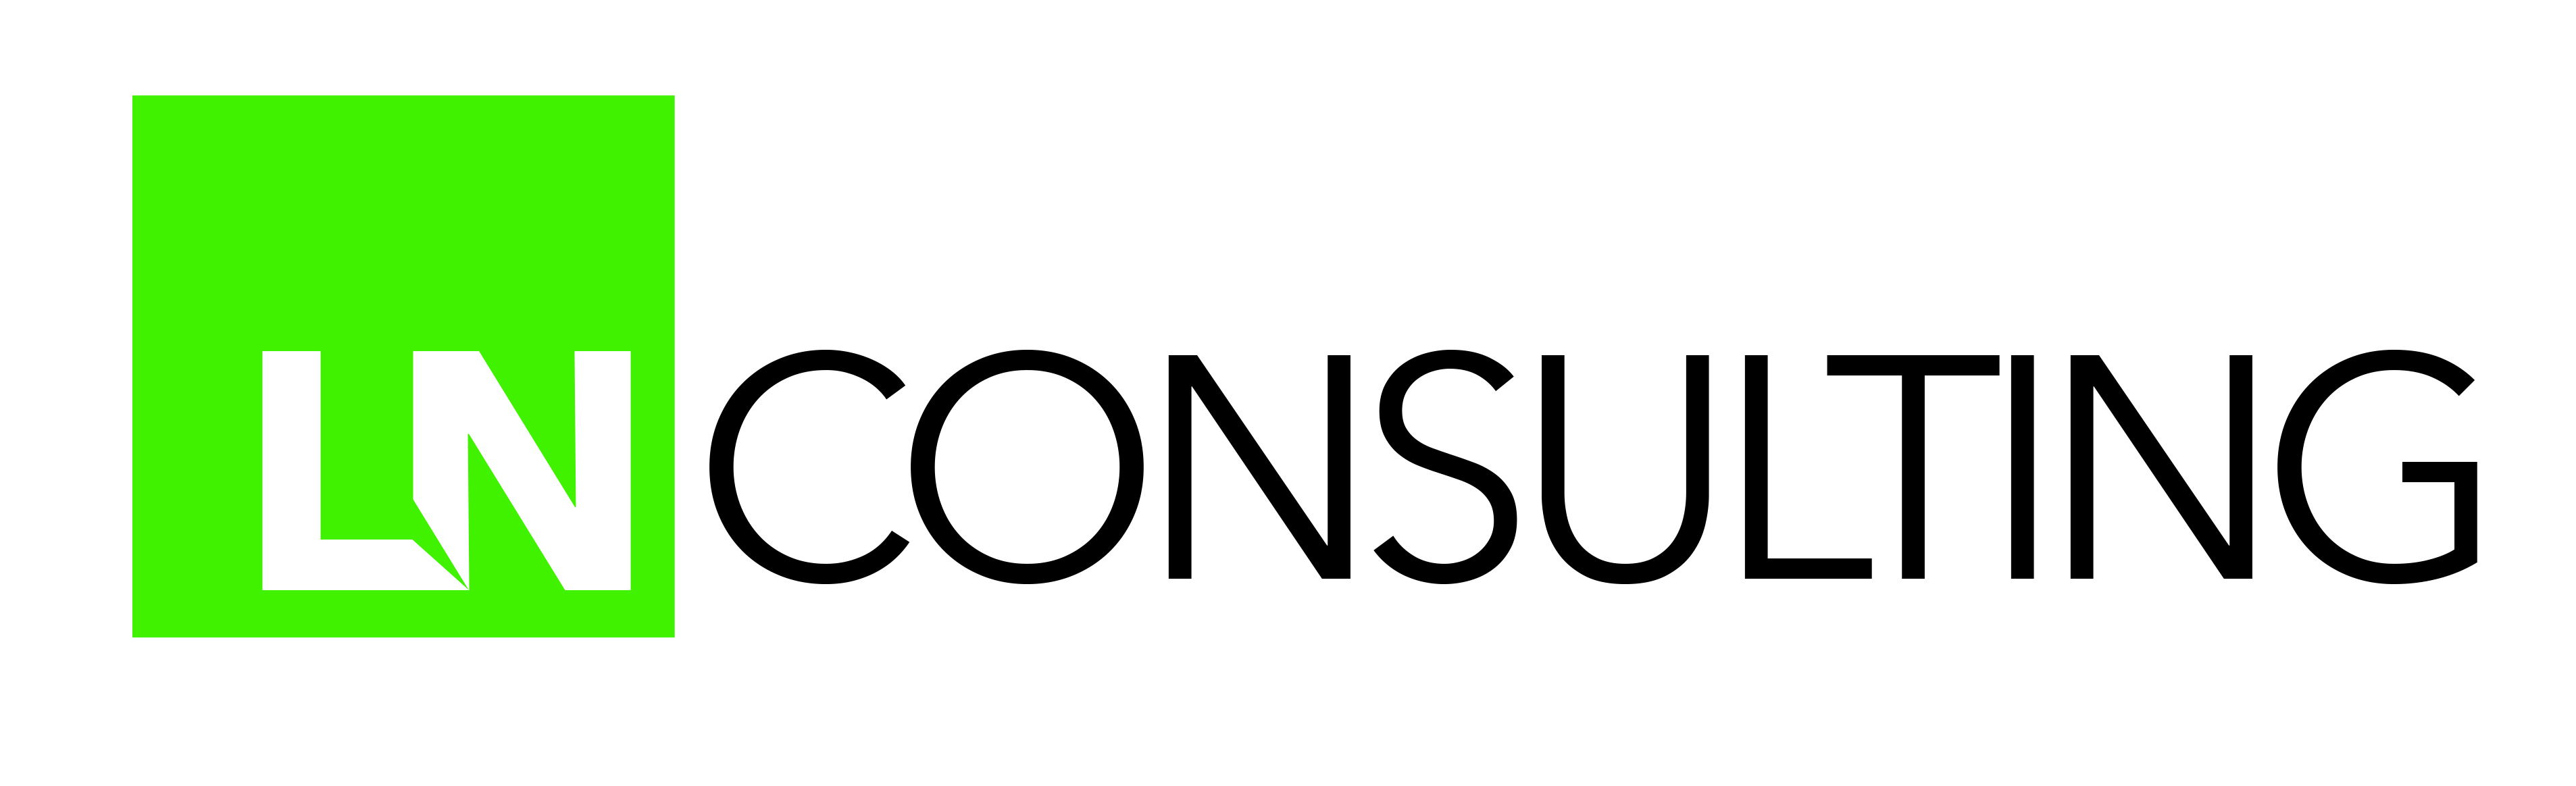 LN Consulting